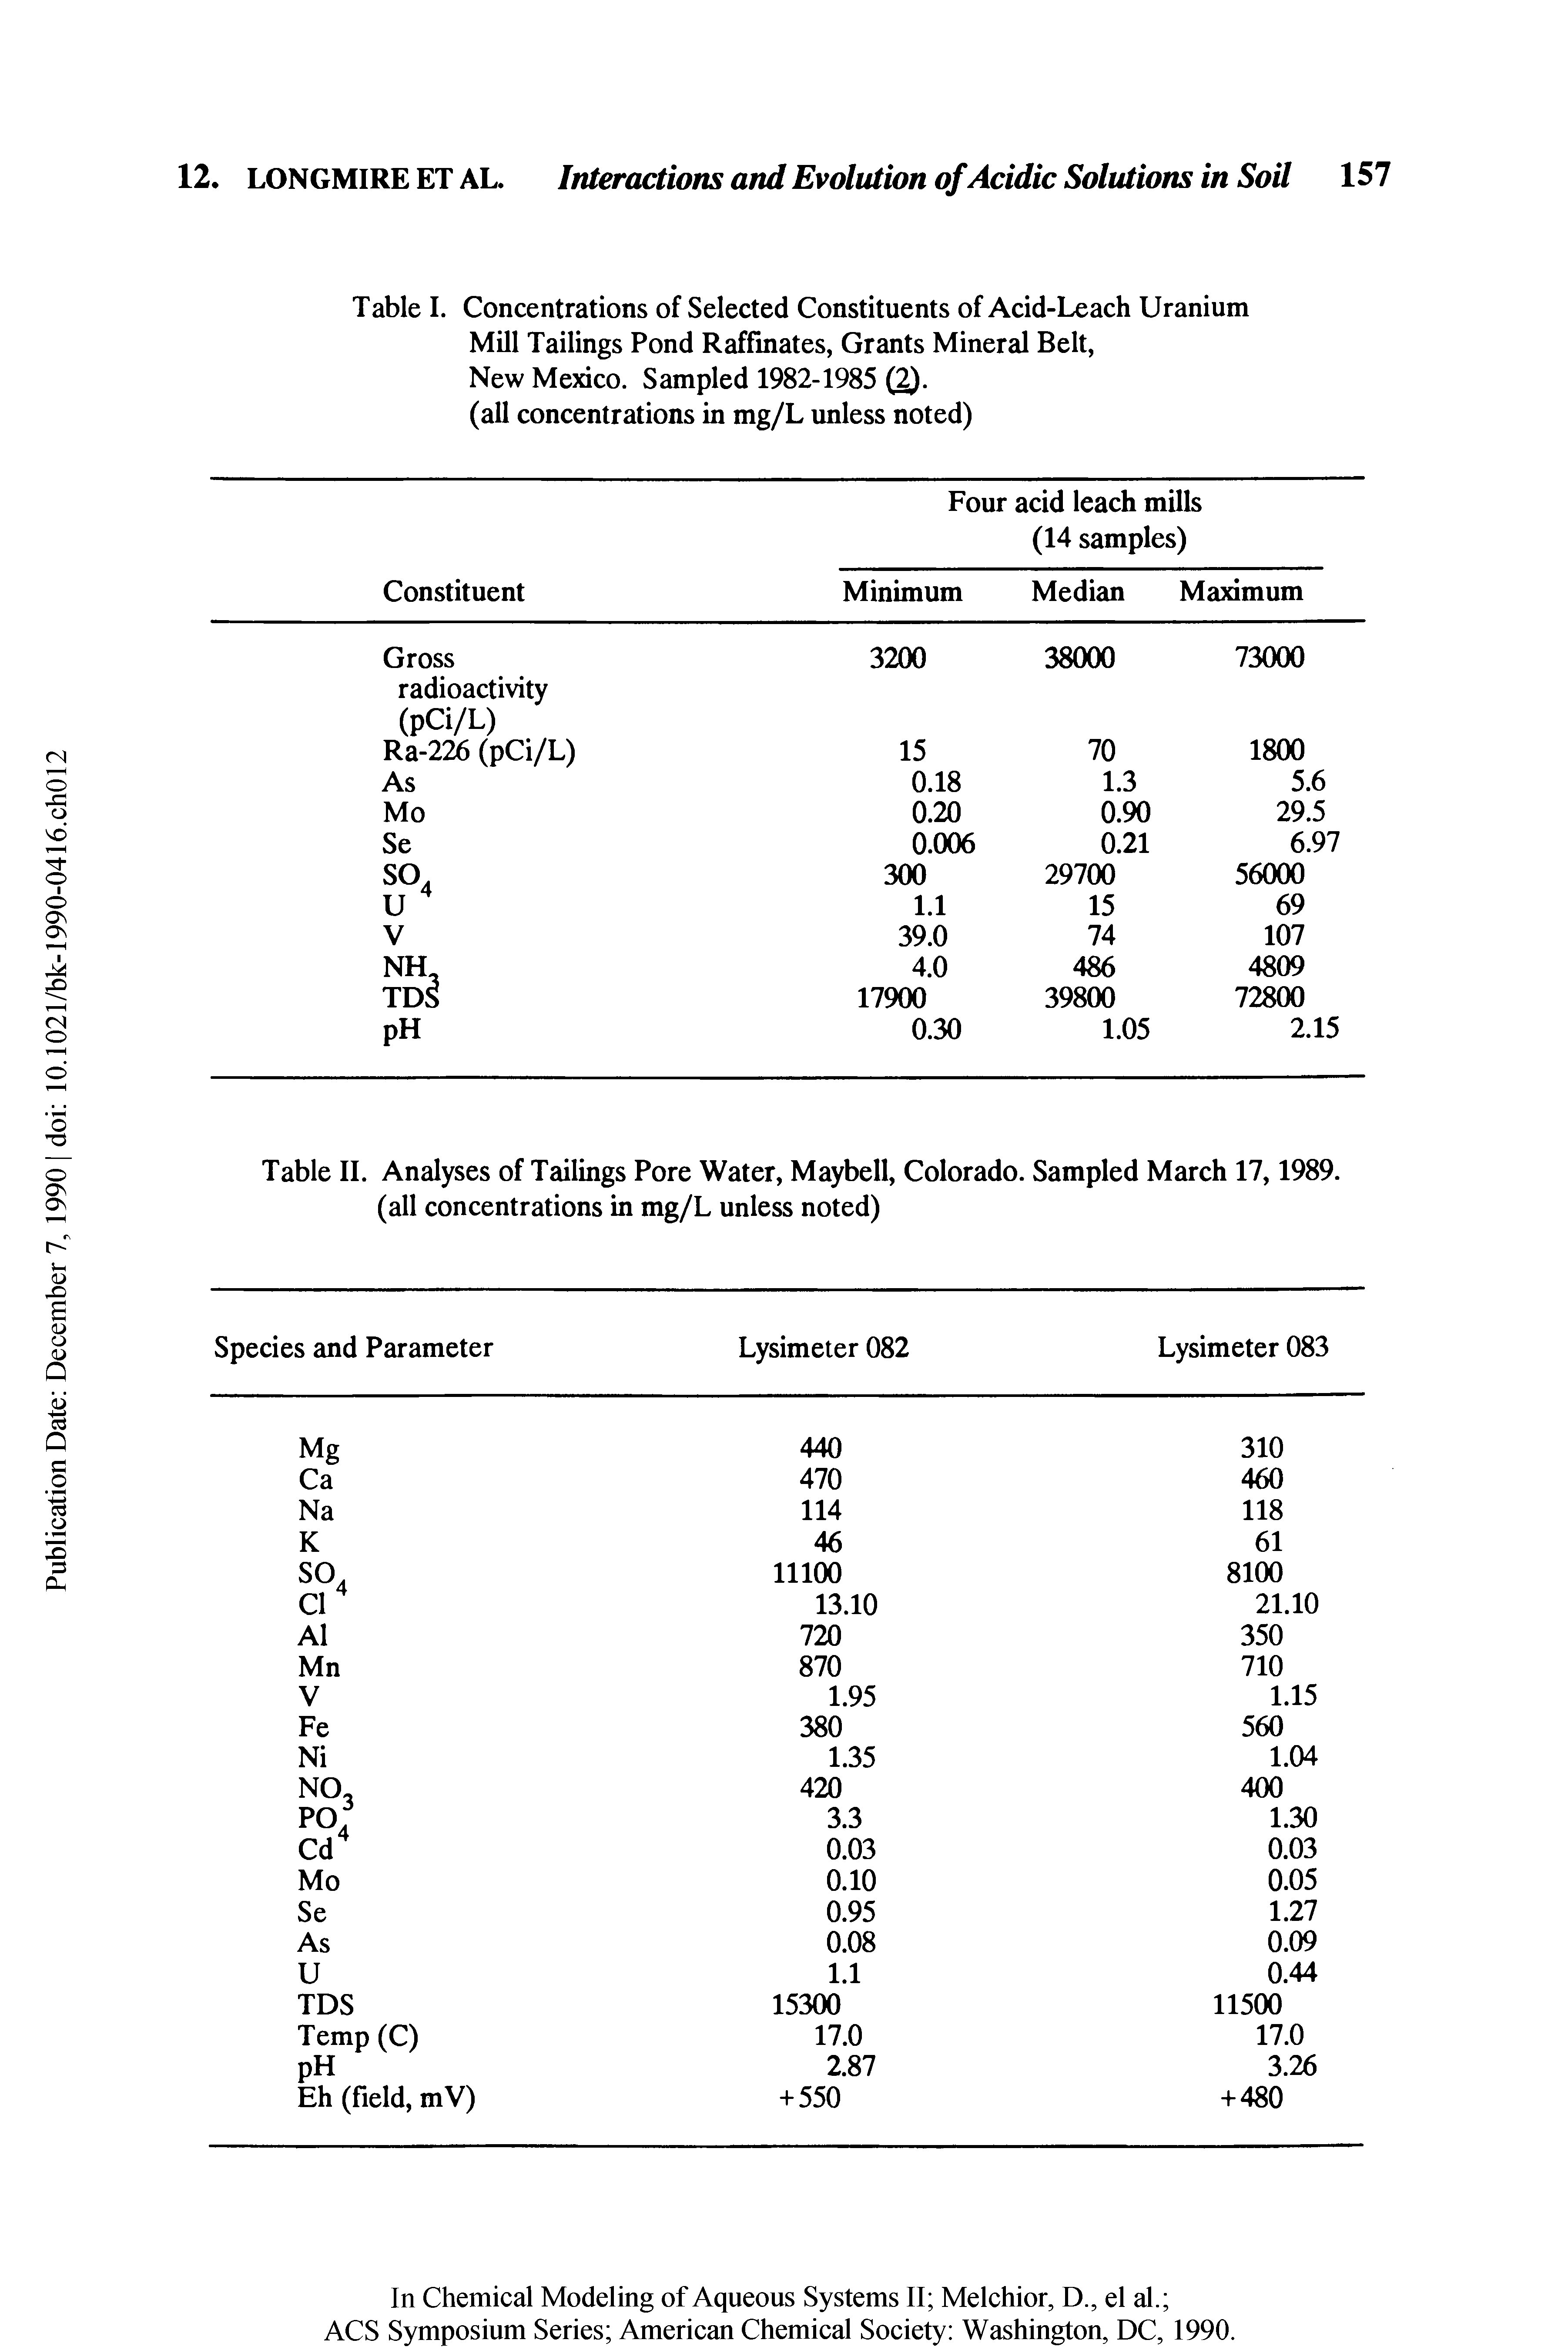 Table II. Analyses of Tailings Pore Water, Maybell, Colorado. Sampled March 17,1989. (all concentrations in mg/L unless noted)...